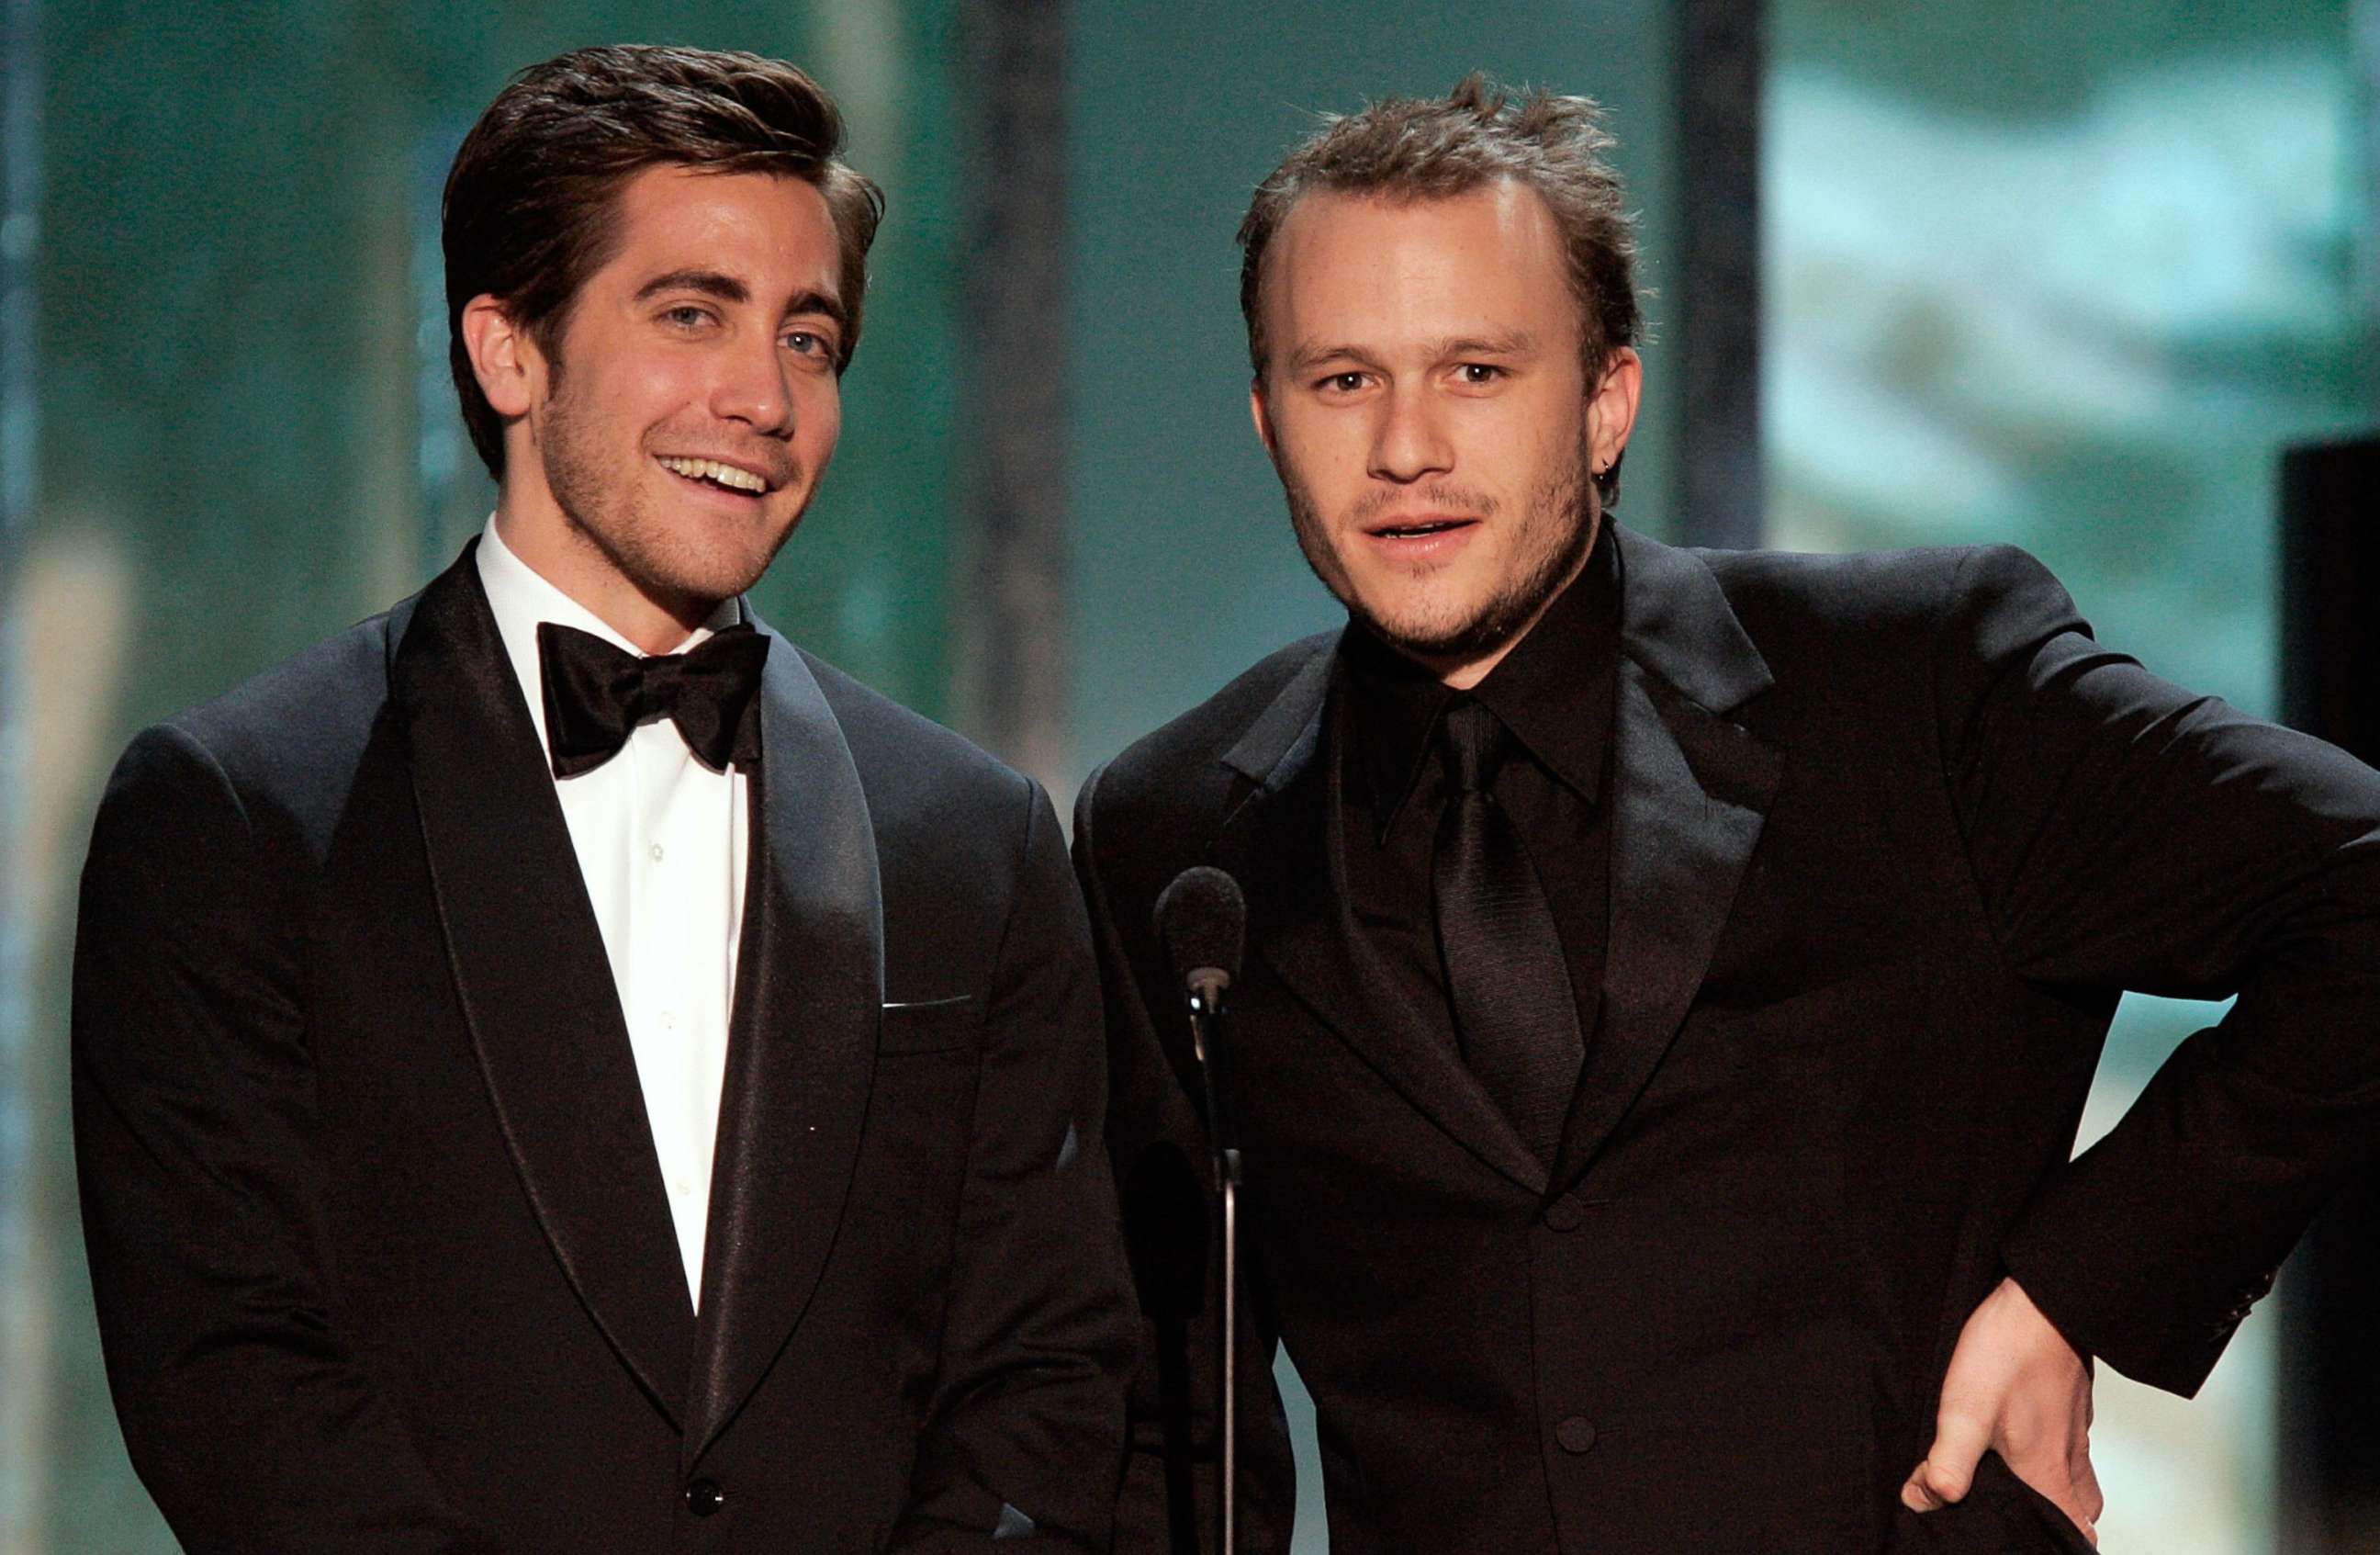 PHOTO: Jake Gyllenhaal and Heath Ledger speak onstage during the 12th Annual Screen Actors Guild Awards held at the Shrine Auditorium, on Jan. 29, 2006, in Los Angeles.